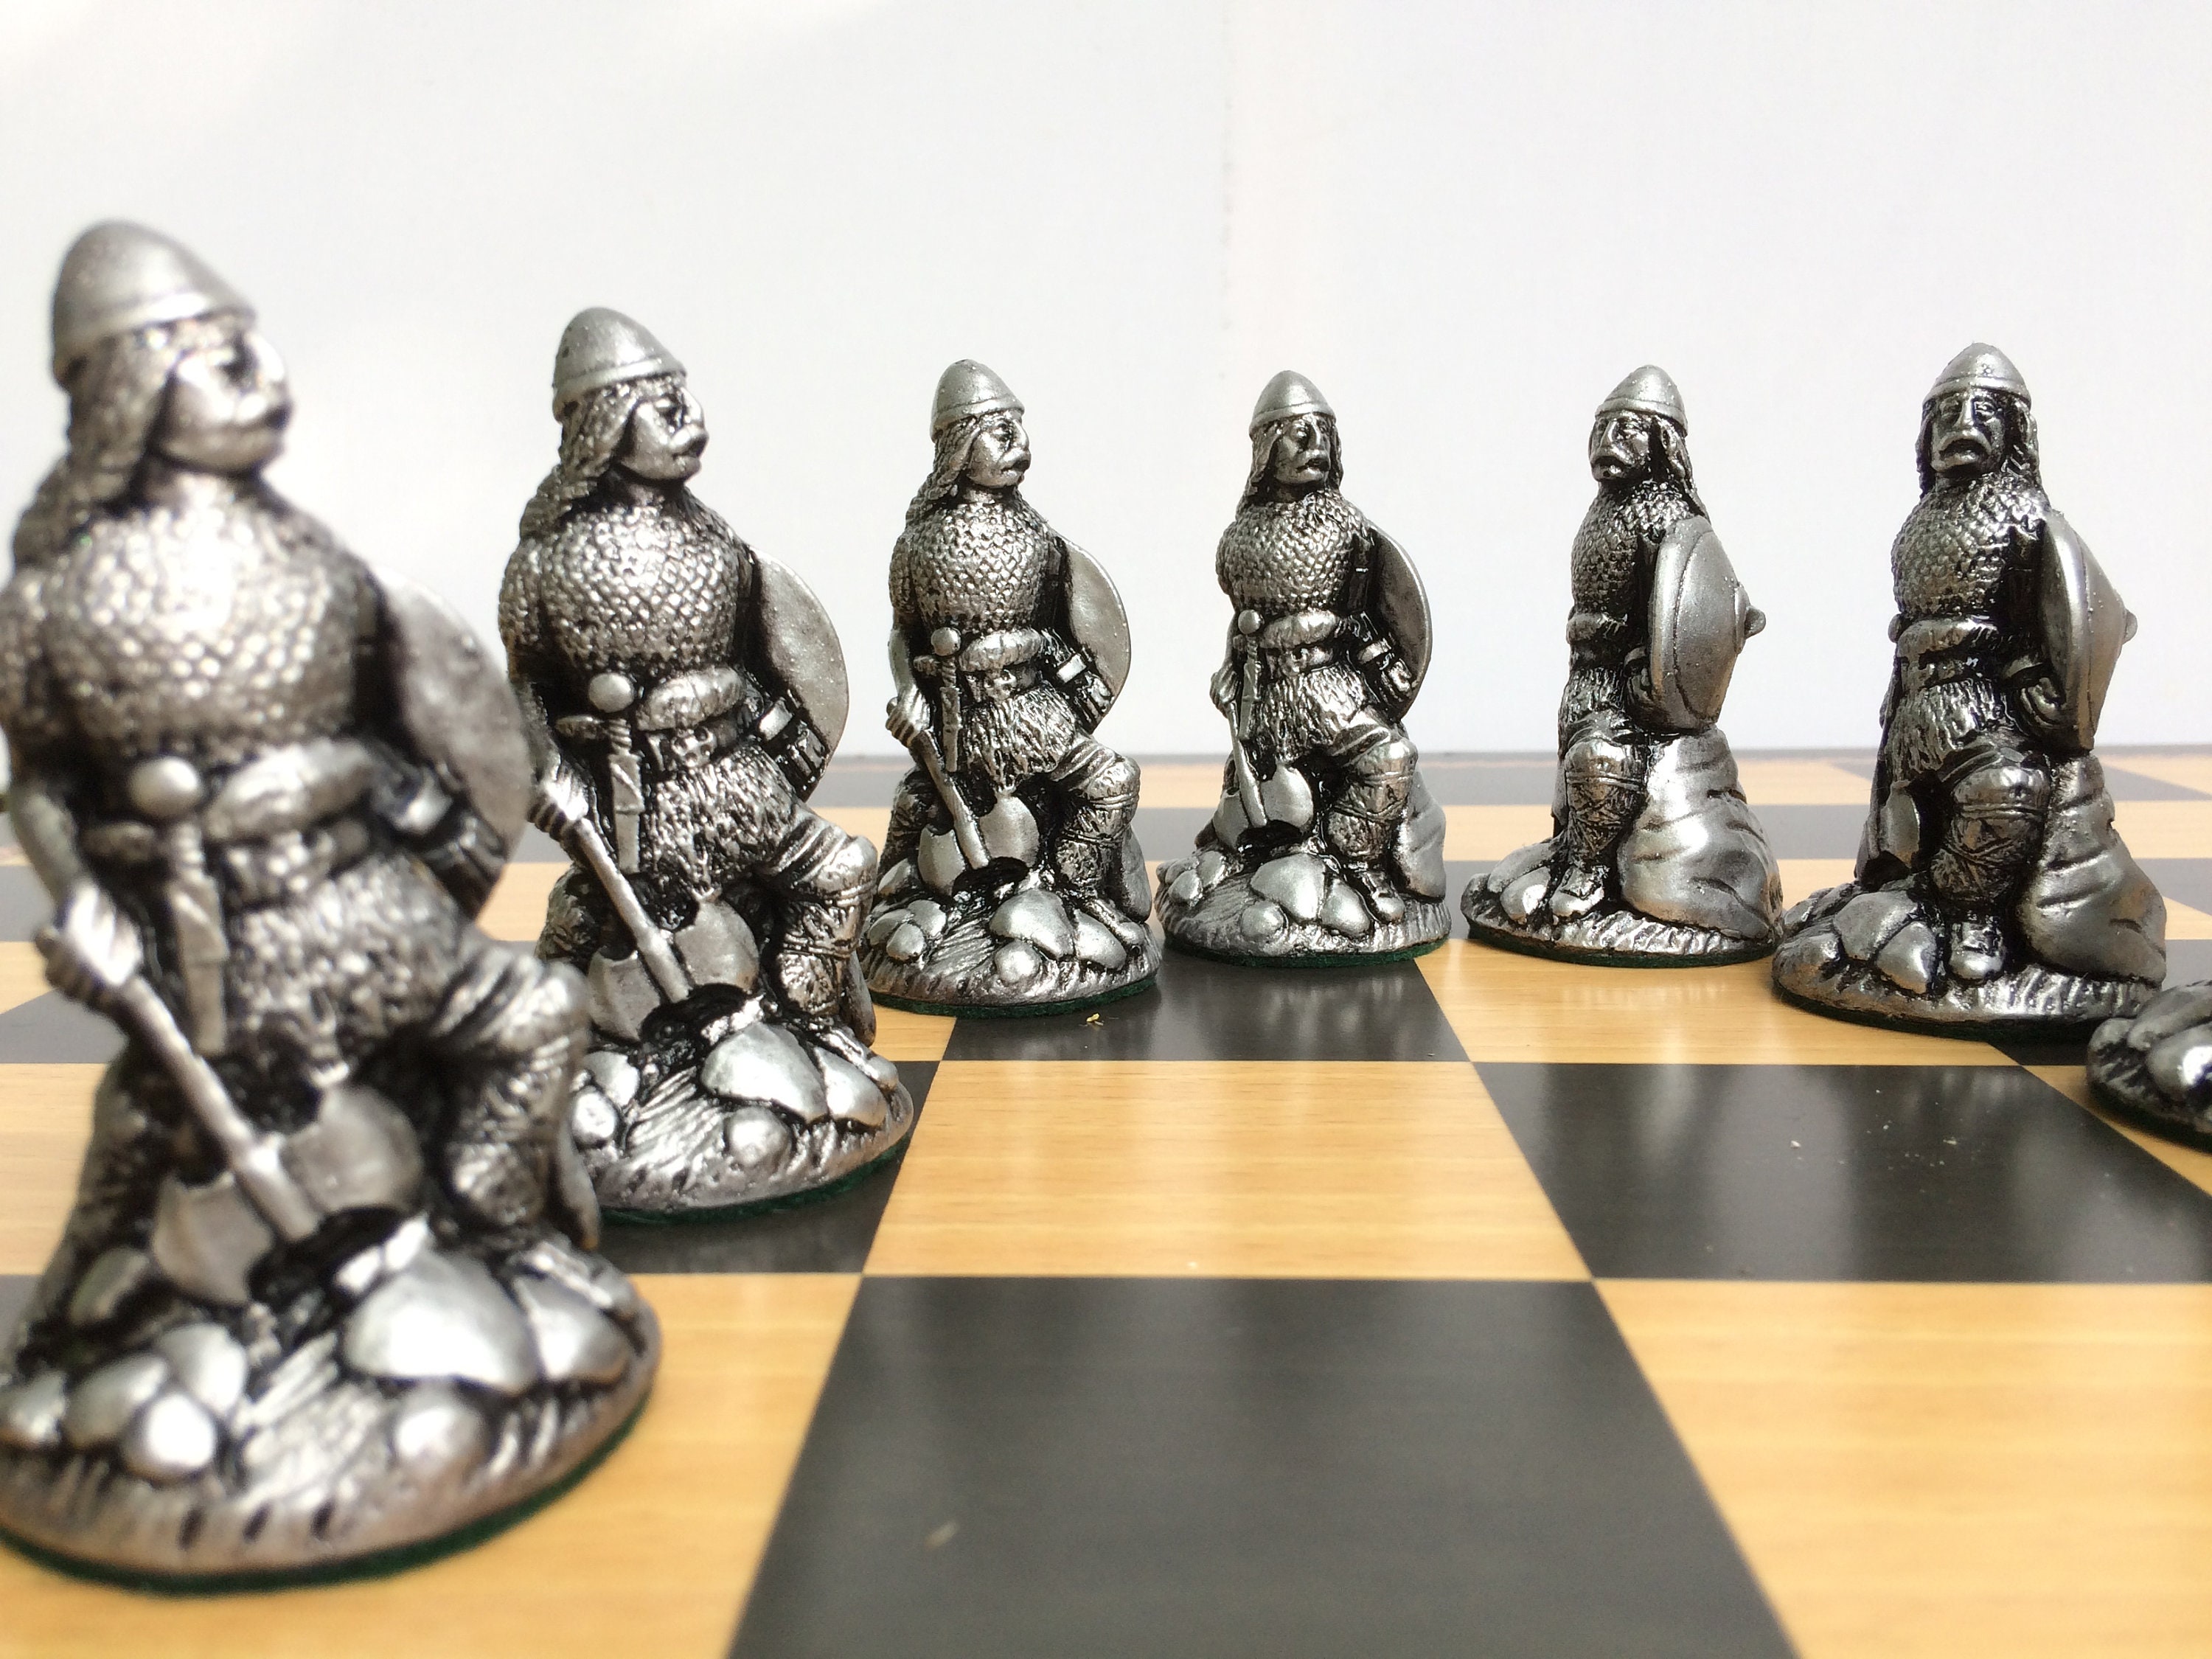 Medieval Chess Set the Normans Chess Set Gold and Silver 